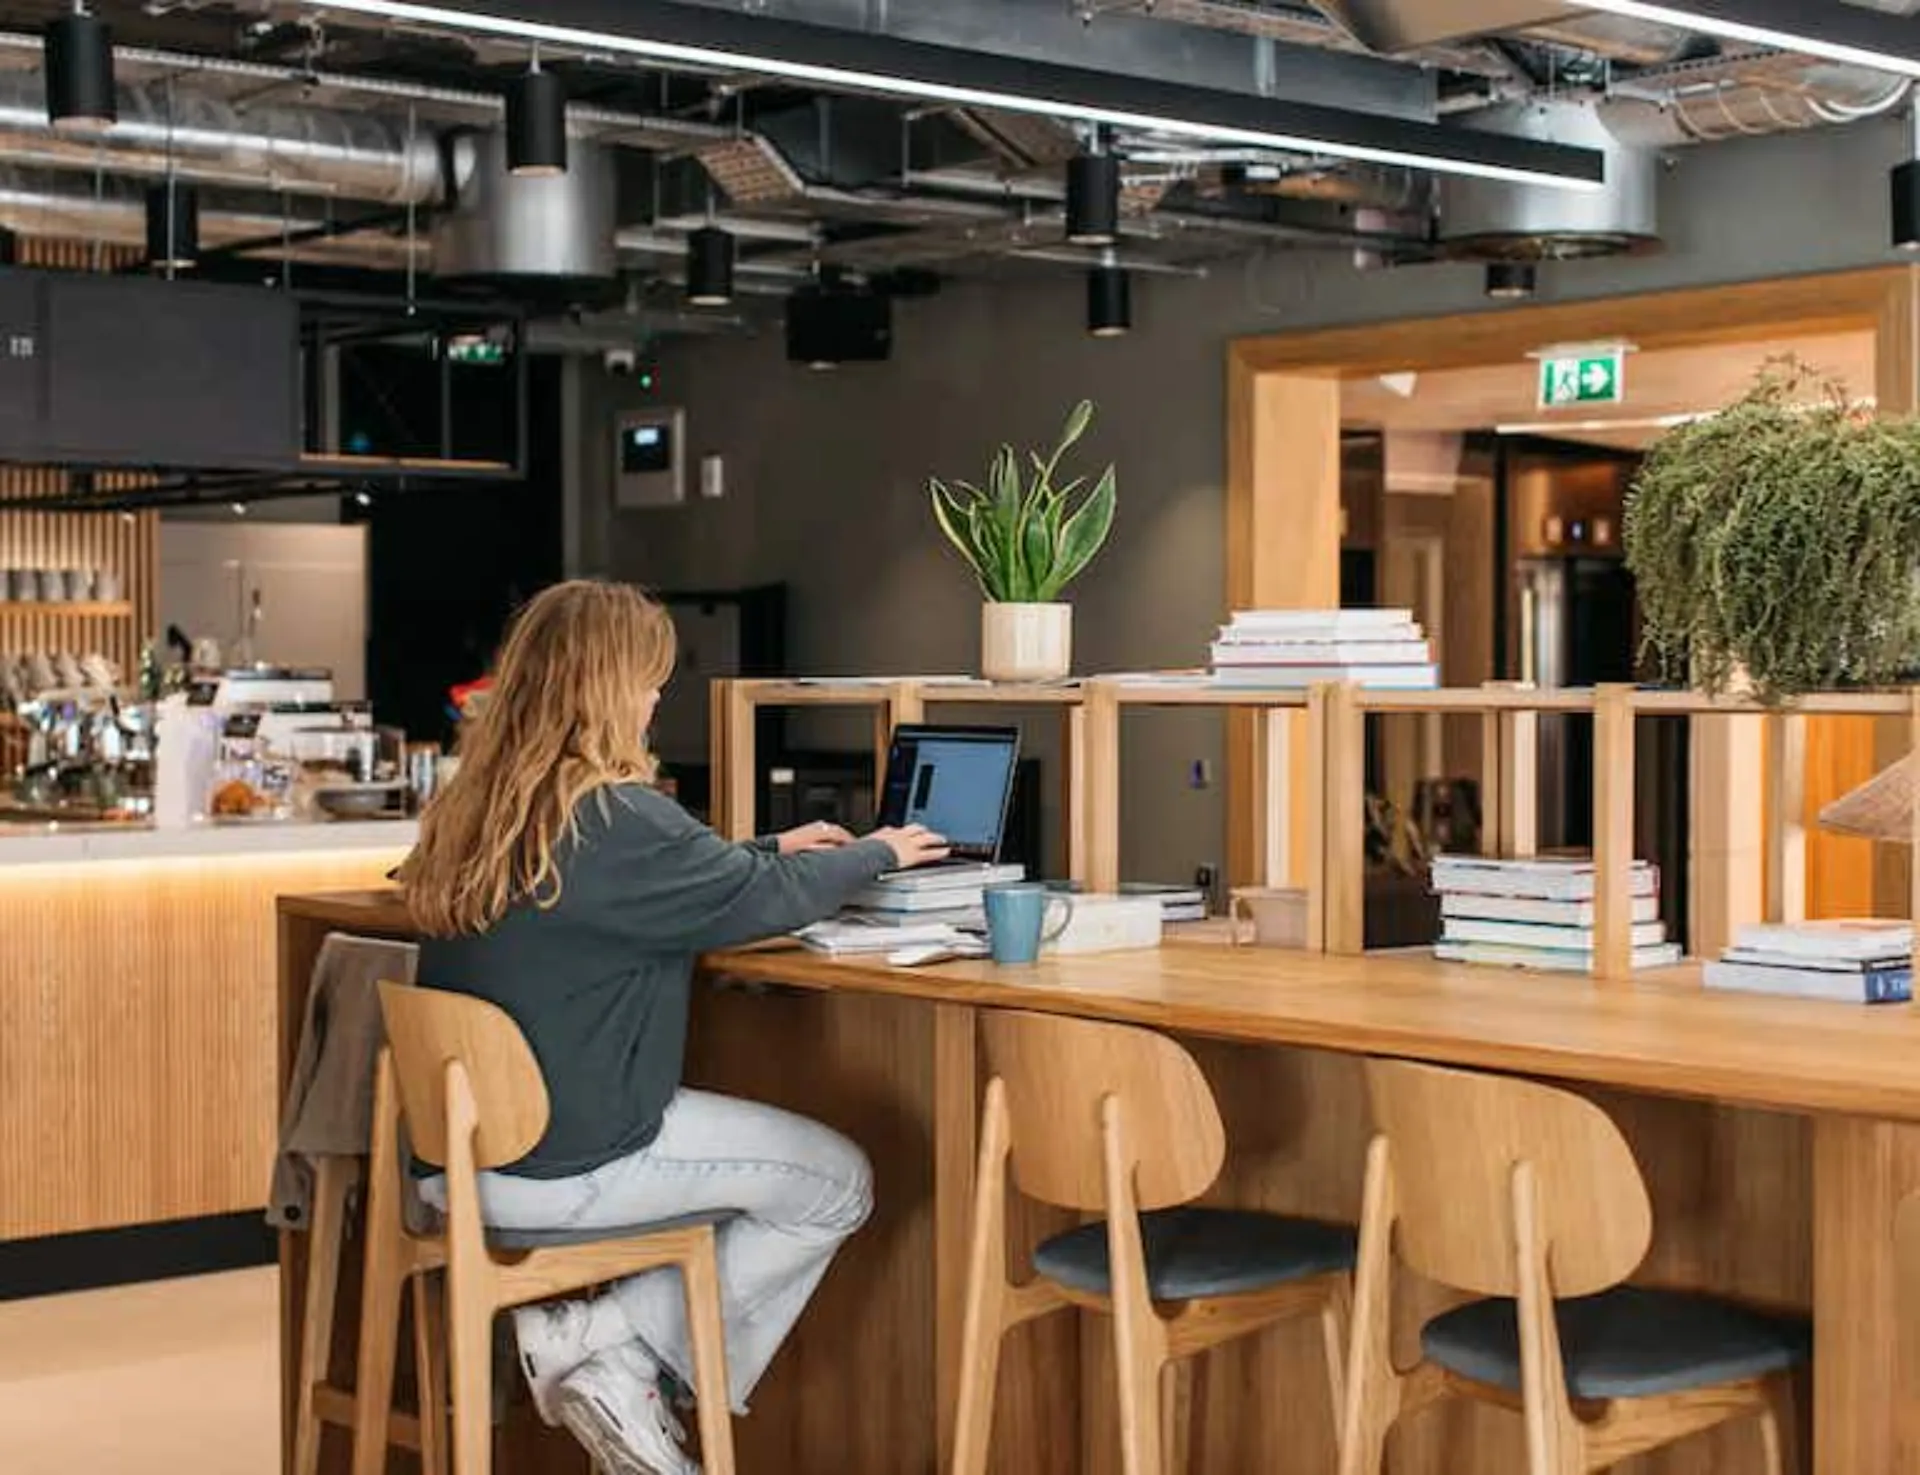 Projects Co-working space Desks day pass bookings 